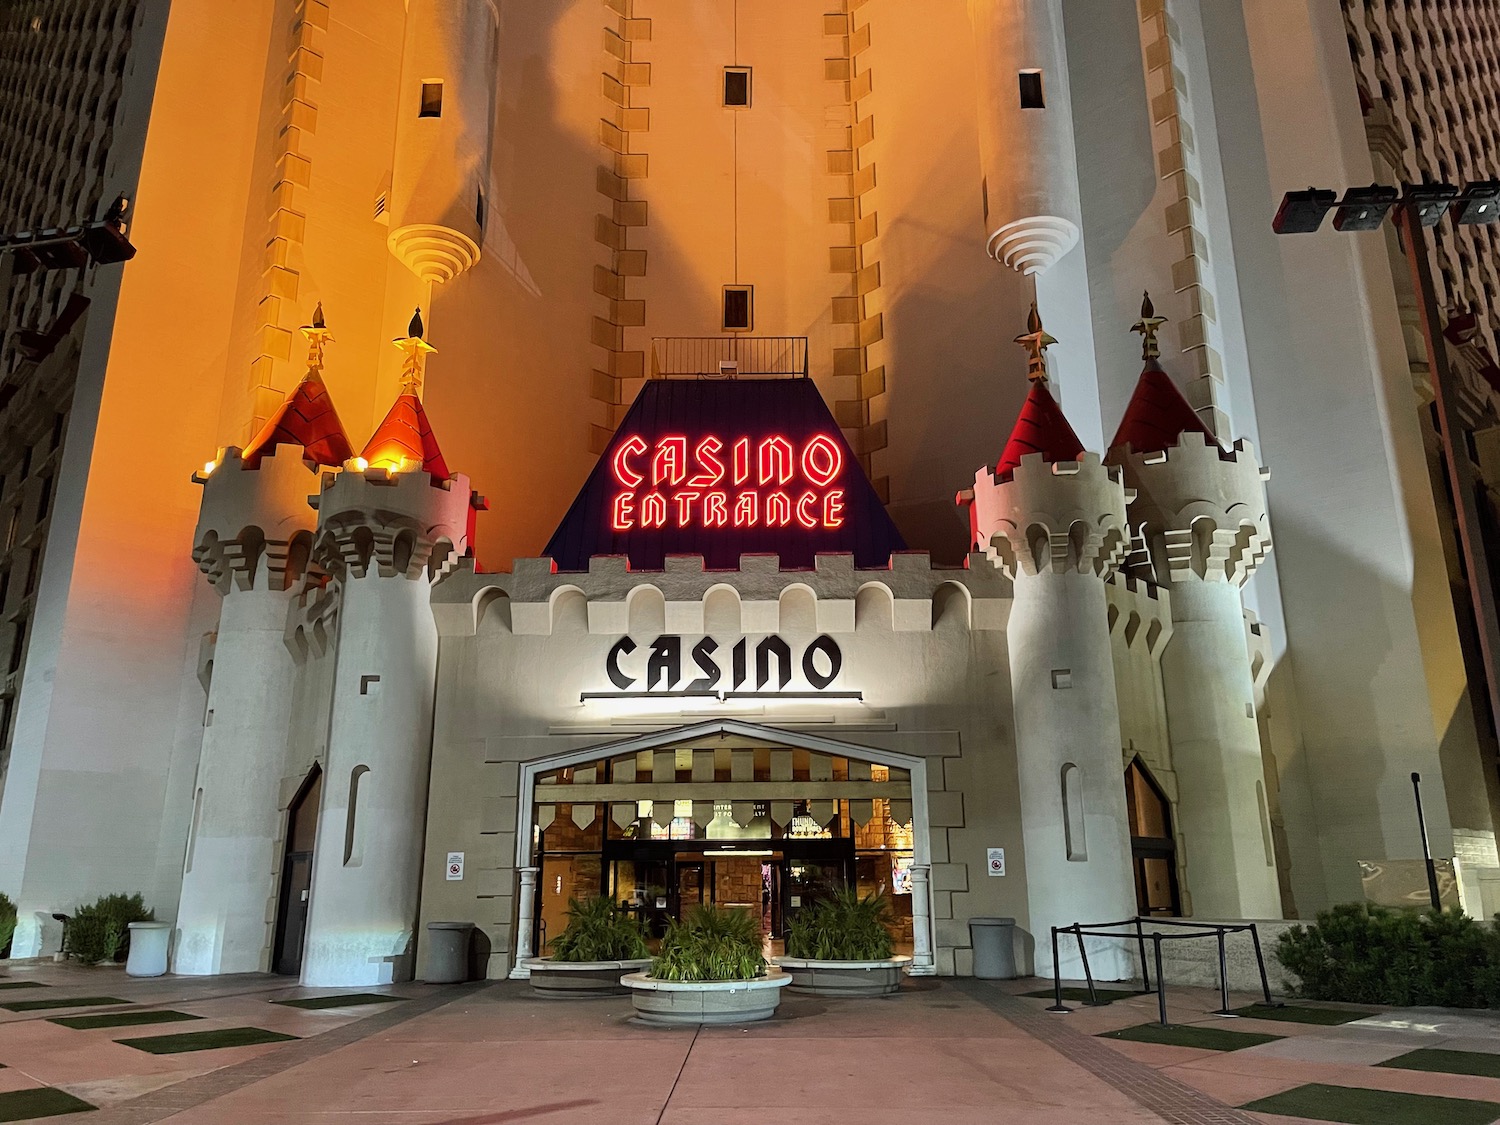 Excalibur Hotel & Casino Review: What To REALLY Expect If You Stay